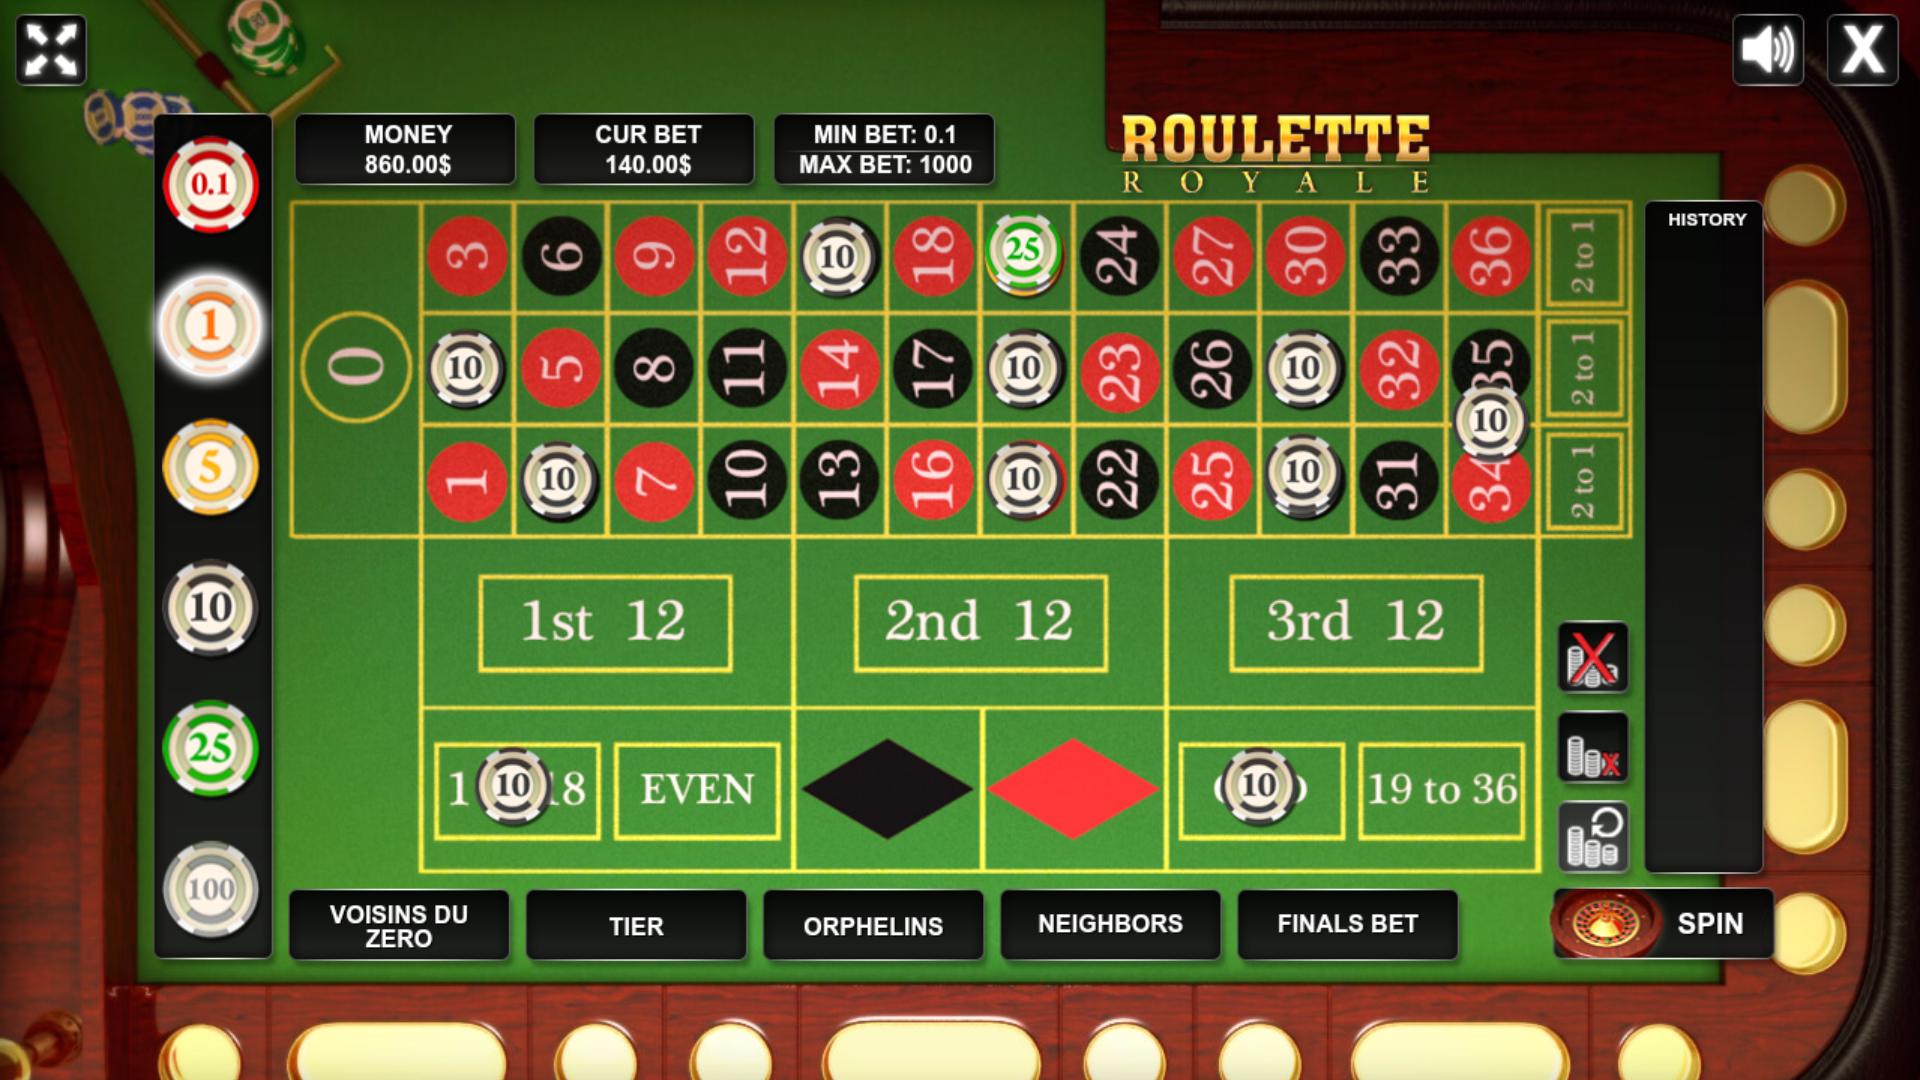 Play roulette games